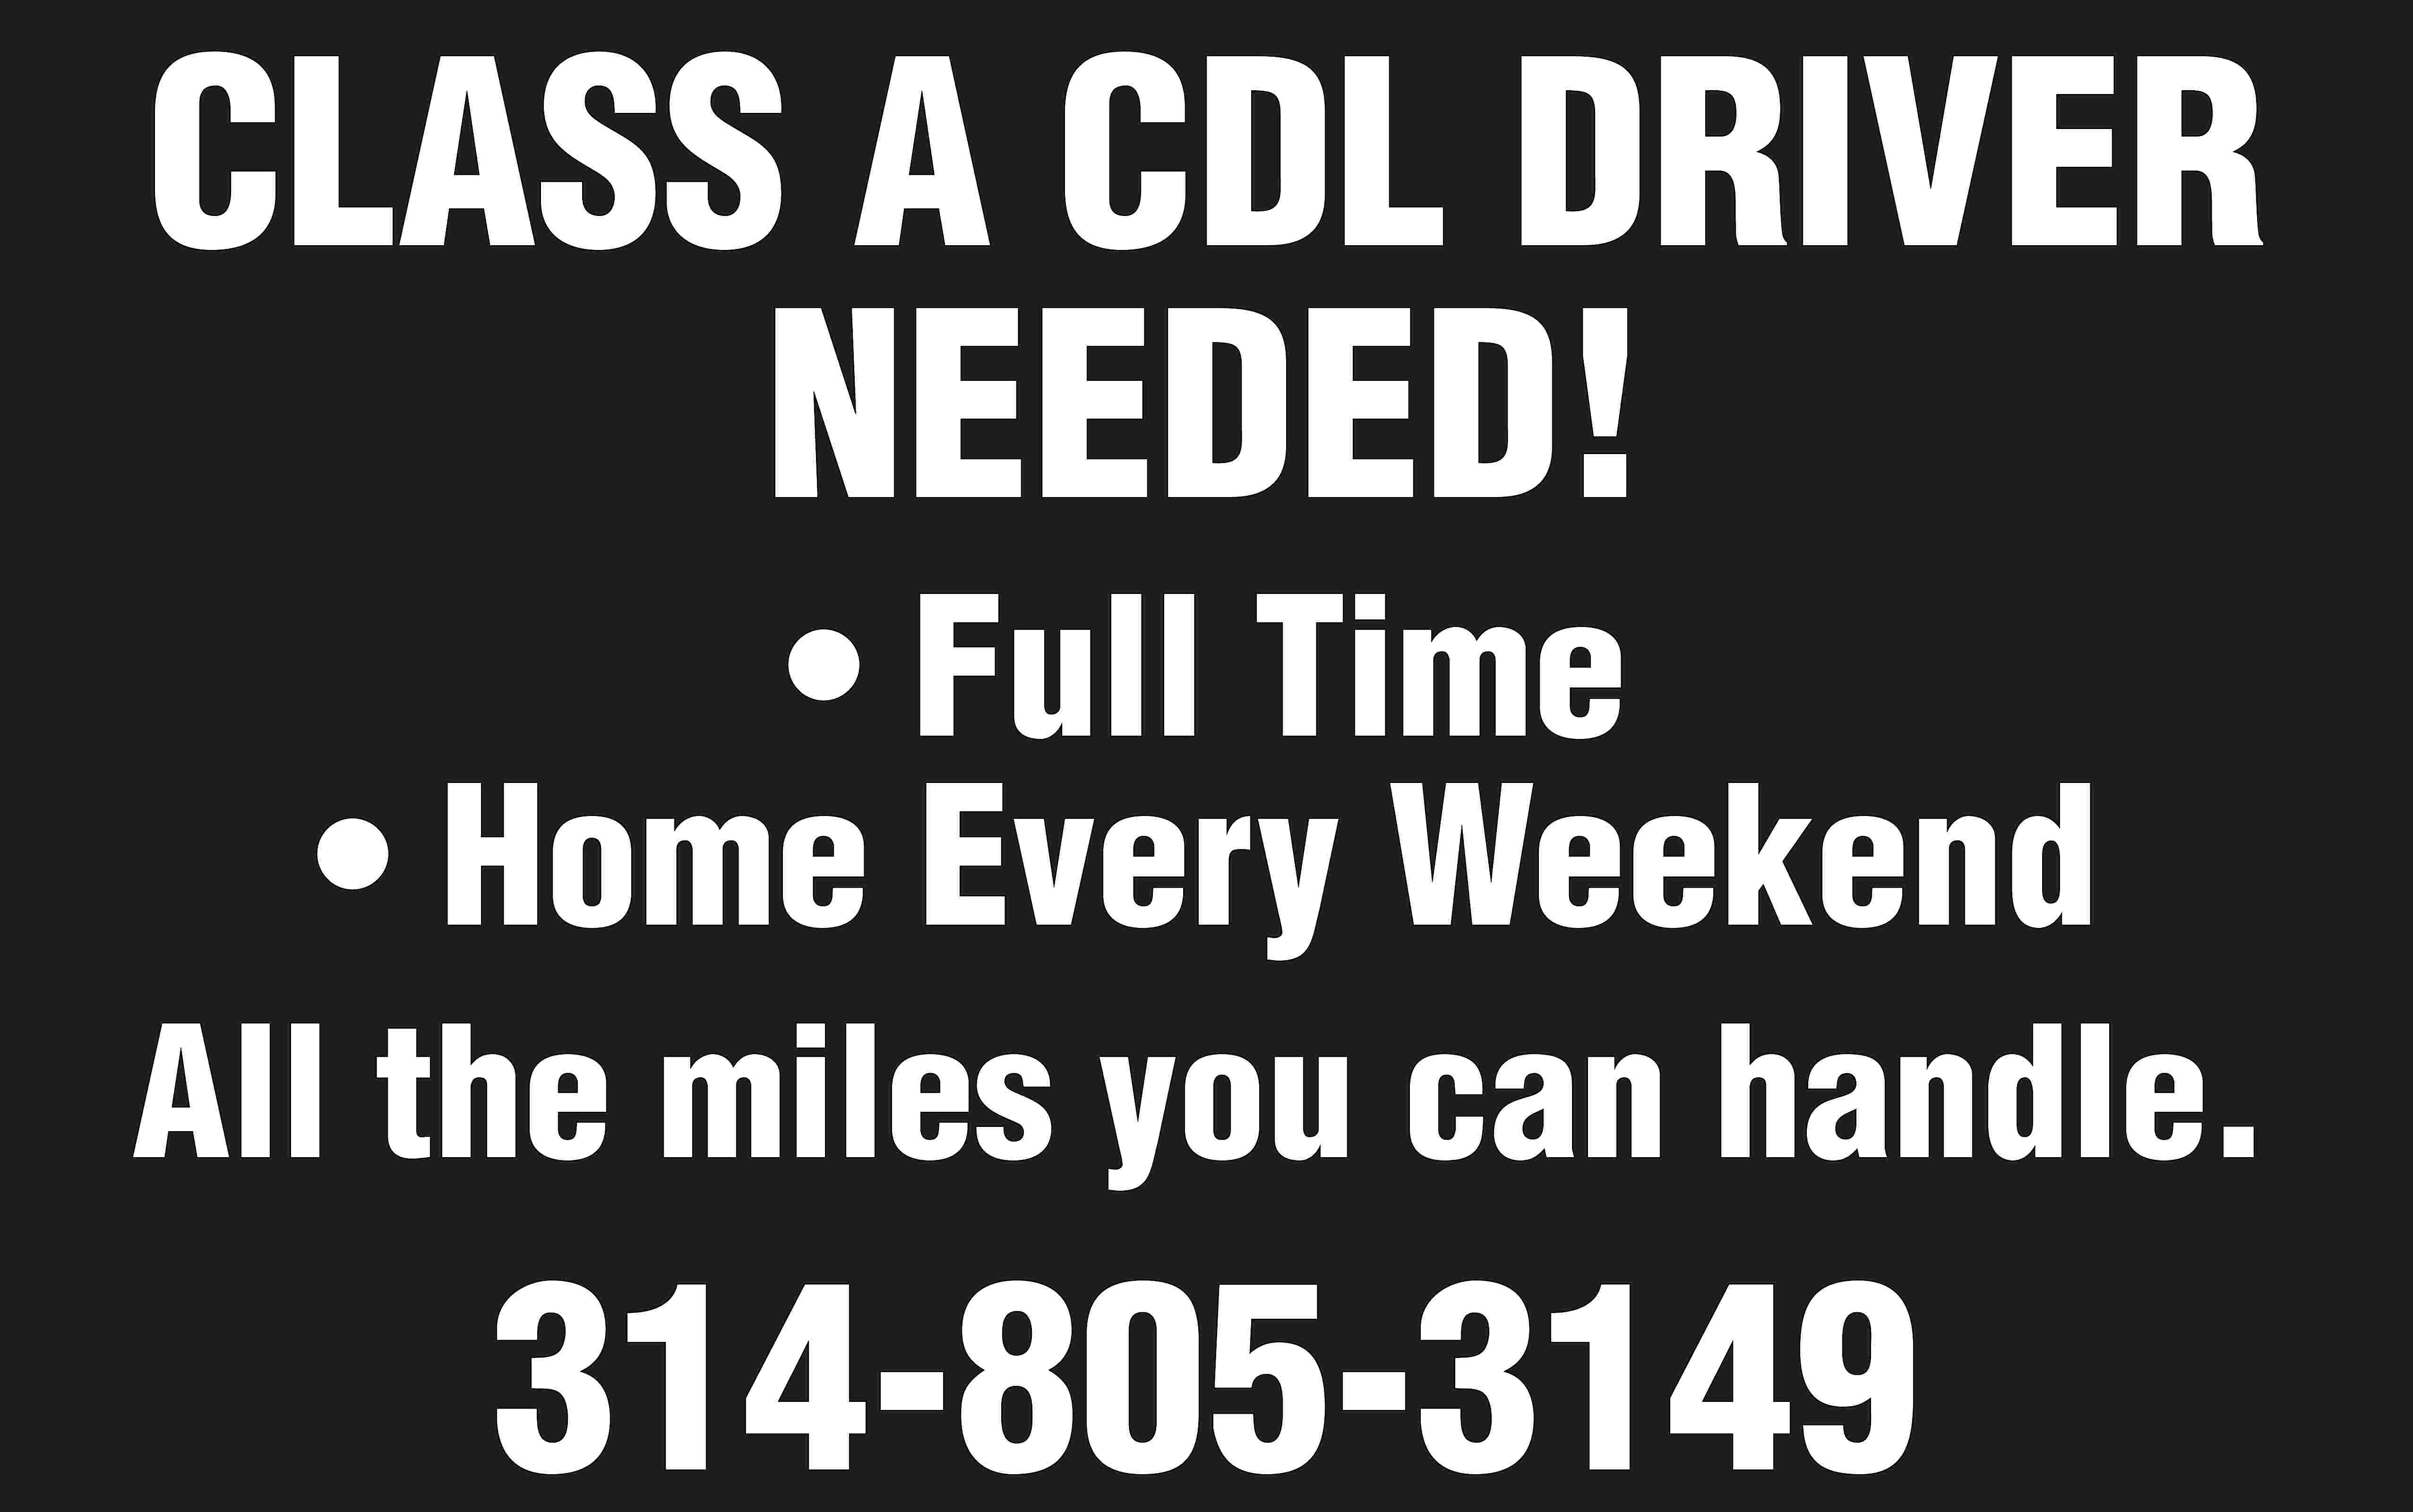 CLASS A CDL DRIVER NEEDED!  CLASS A CDL DRIVER NEEDED! • Full Time • Home Every Weekend All the miles you can handle. 314-805-3149